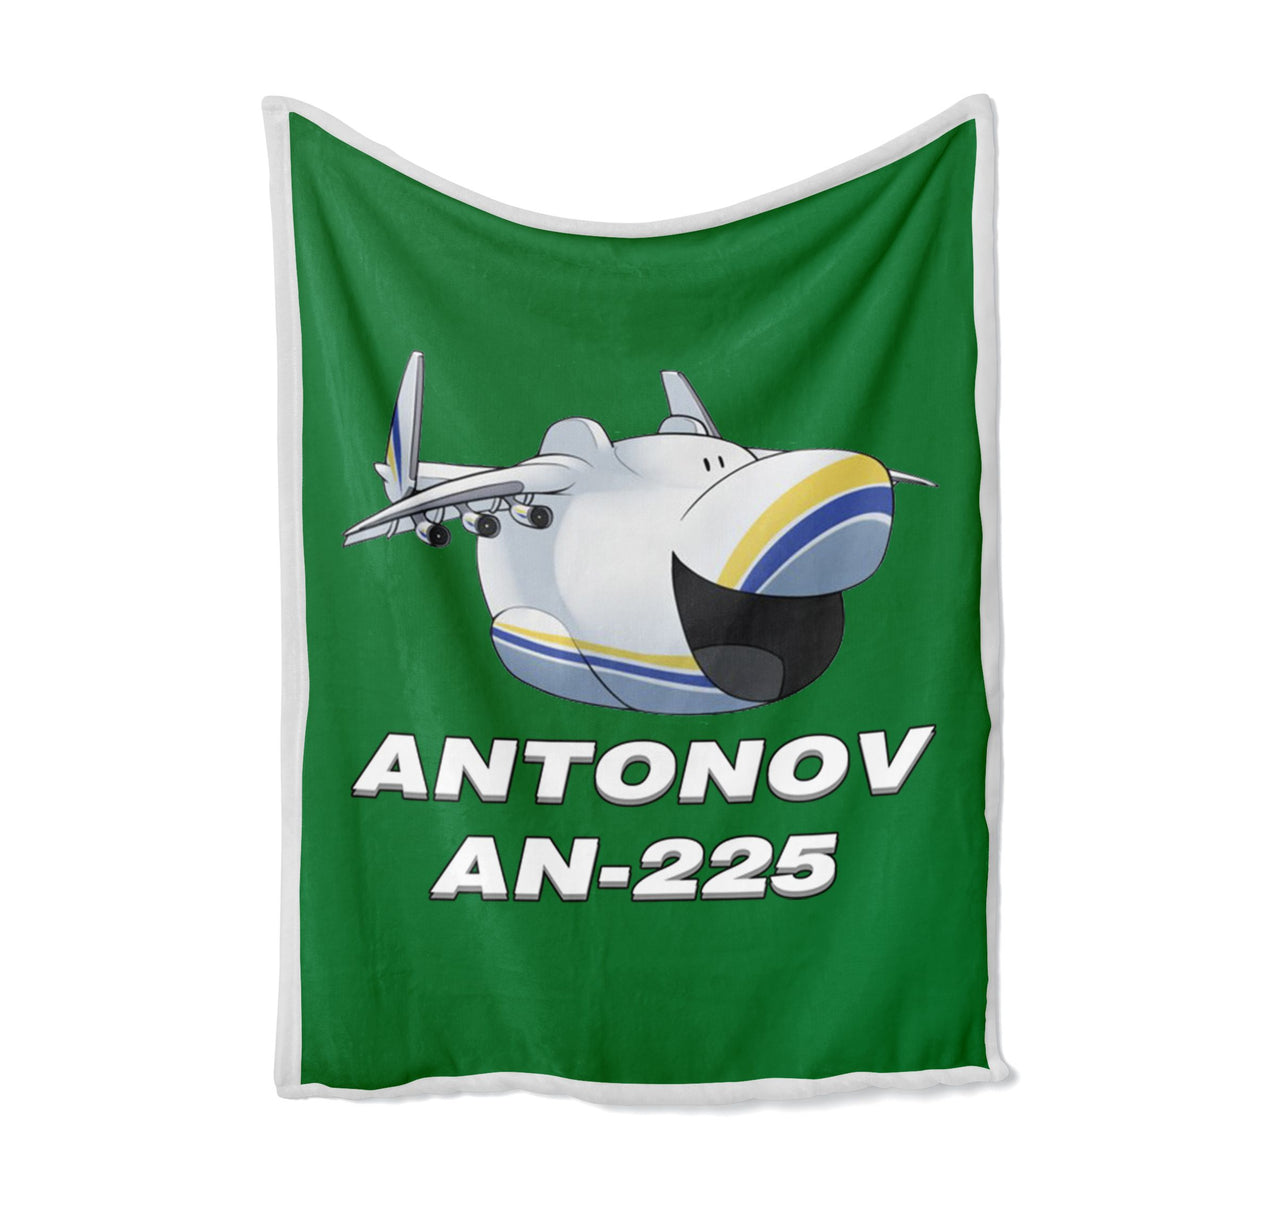 Antonov AN-225 (23) Designed Bed Blankets & Covers